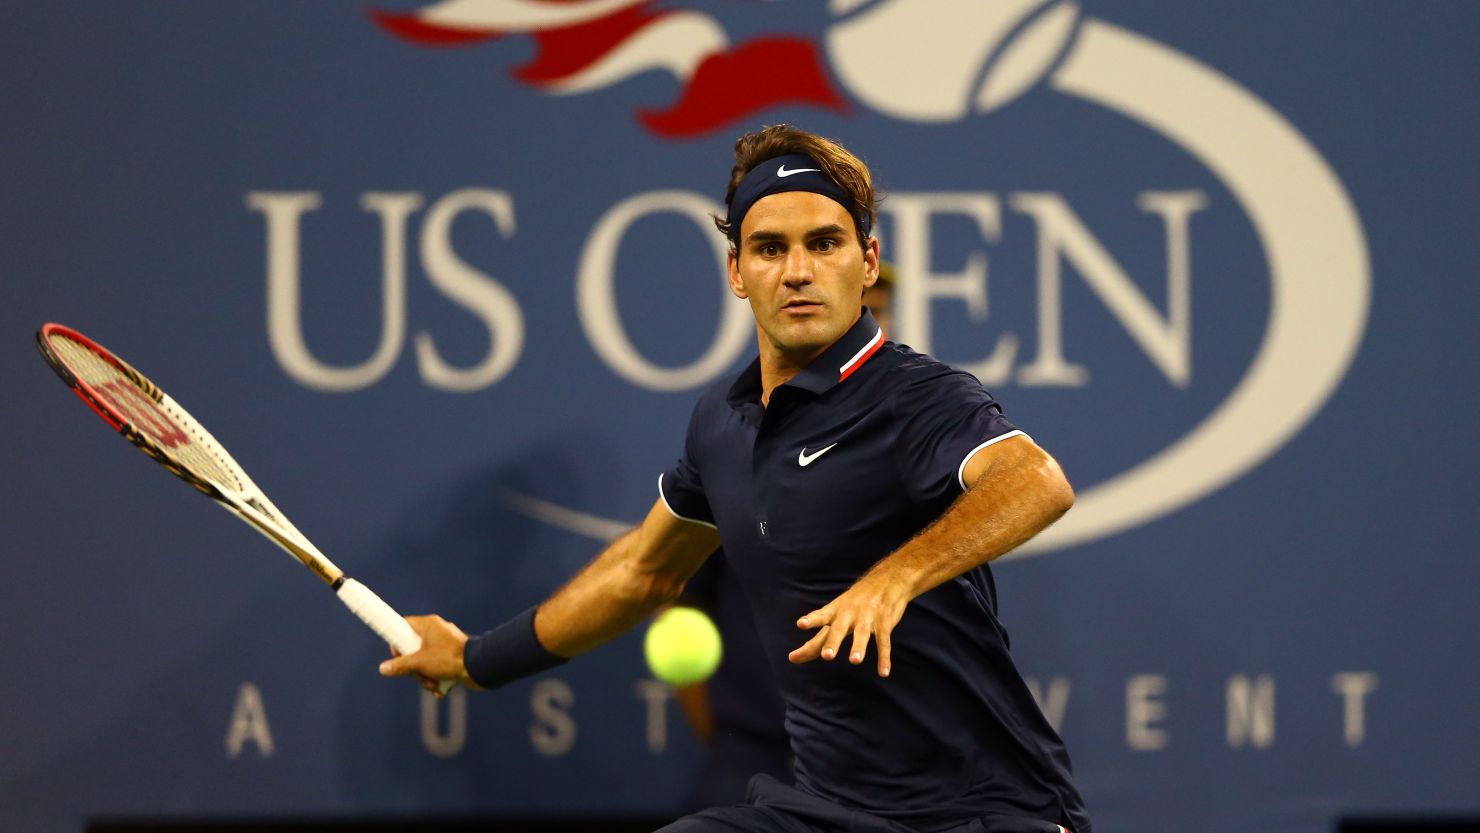 Roger Federer sends the ball back during a winning first set against Donald Young in their first round match.